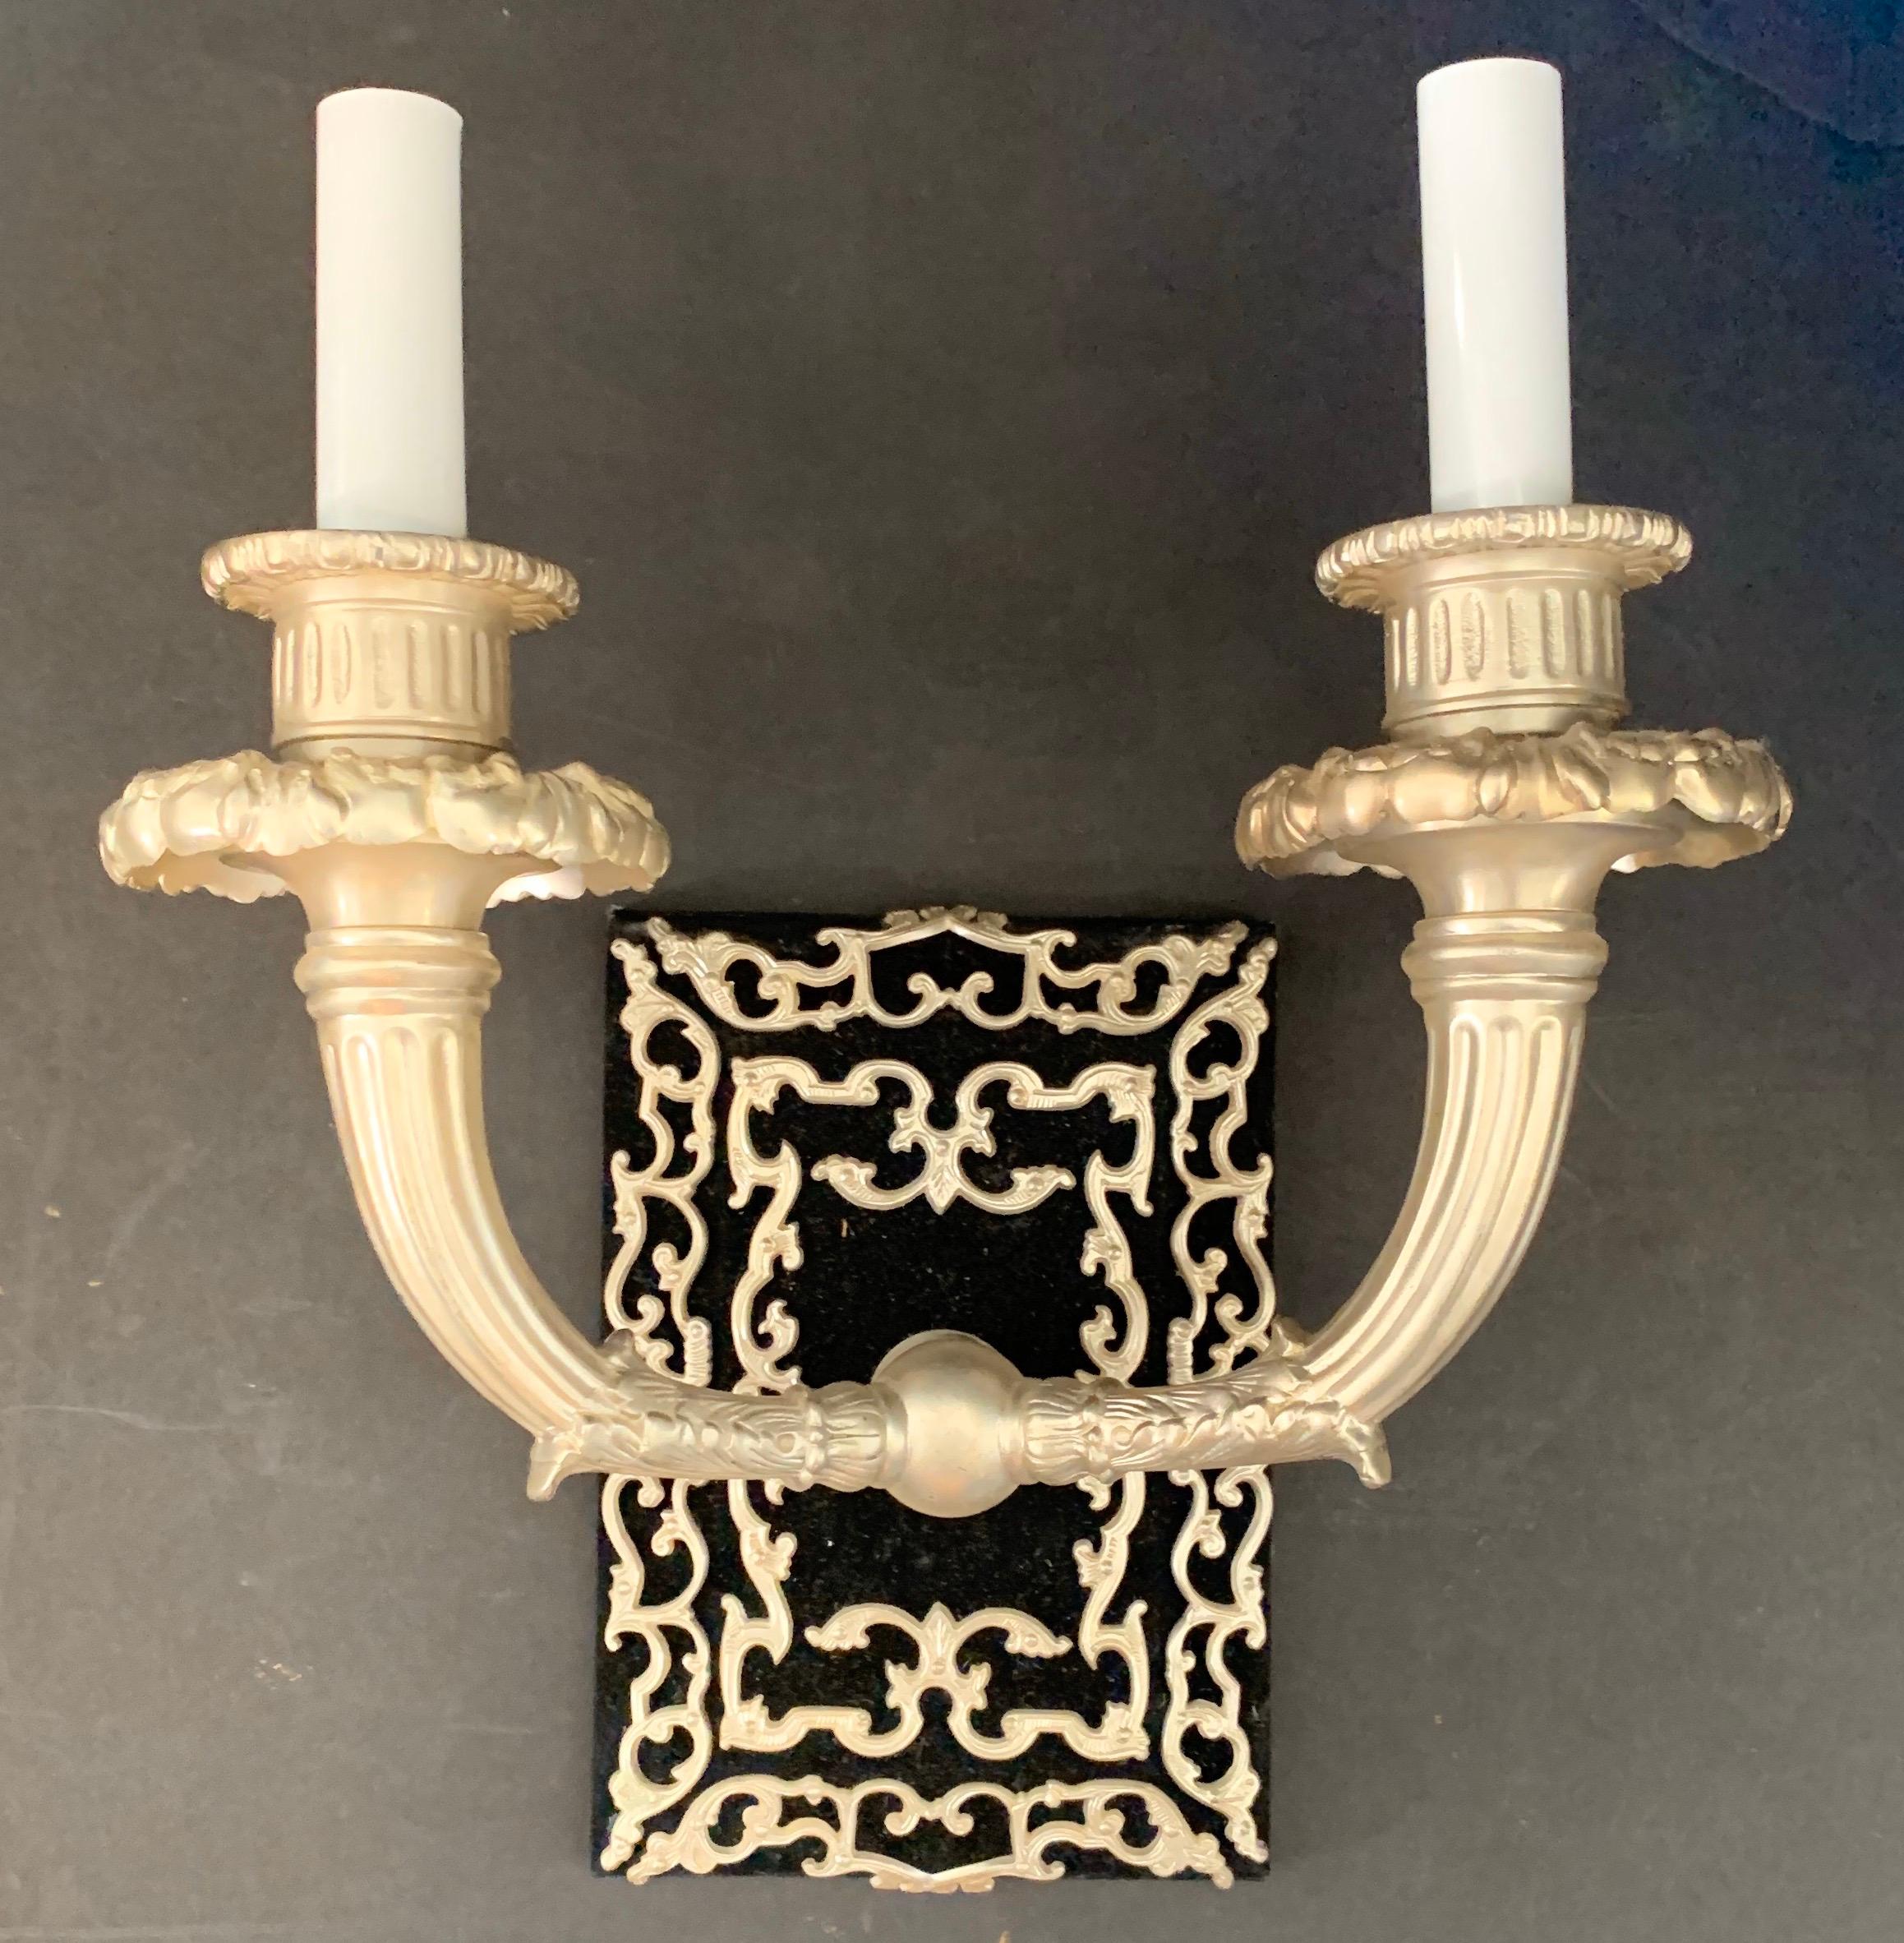 A wonderful French Empire / neoclassical silvered bronze set of 3 sconces in the manner of Caldwell set on black velvet Backplate with silvered bronze ormolu mounts.
Rewired and ready to enjoy.